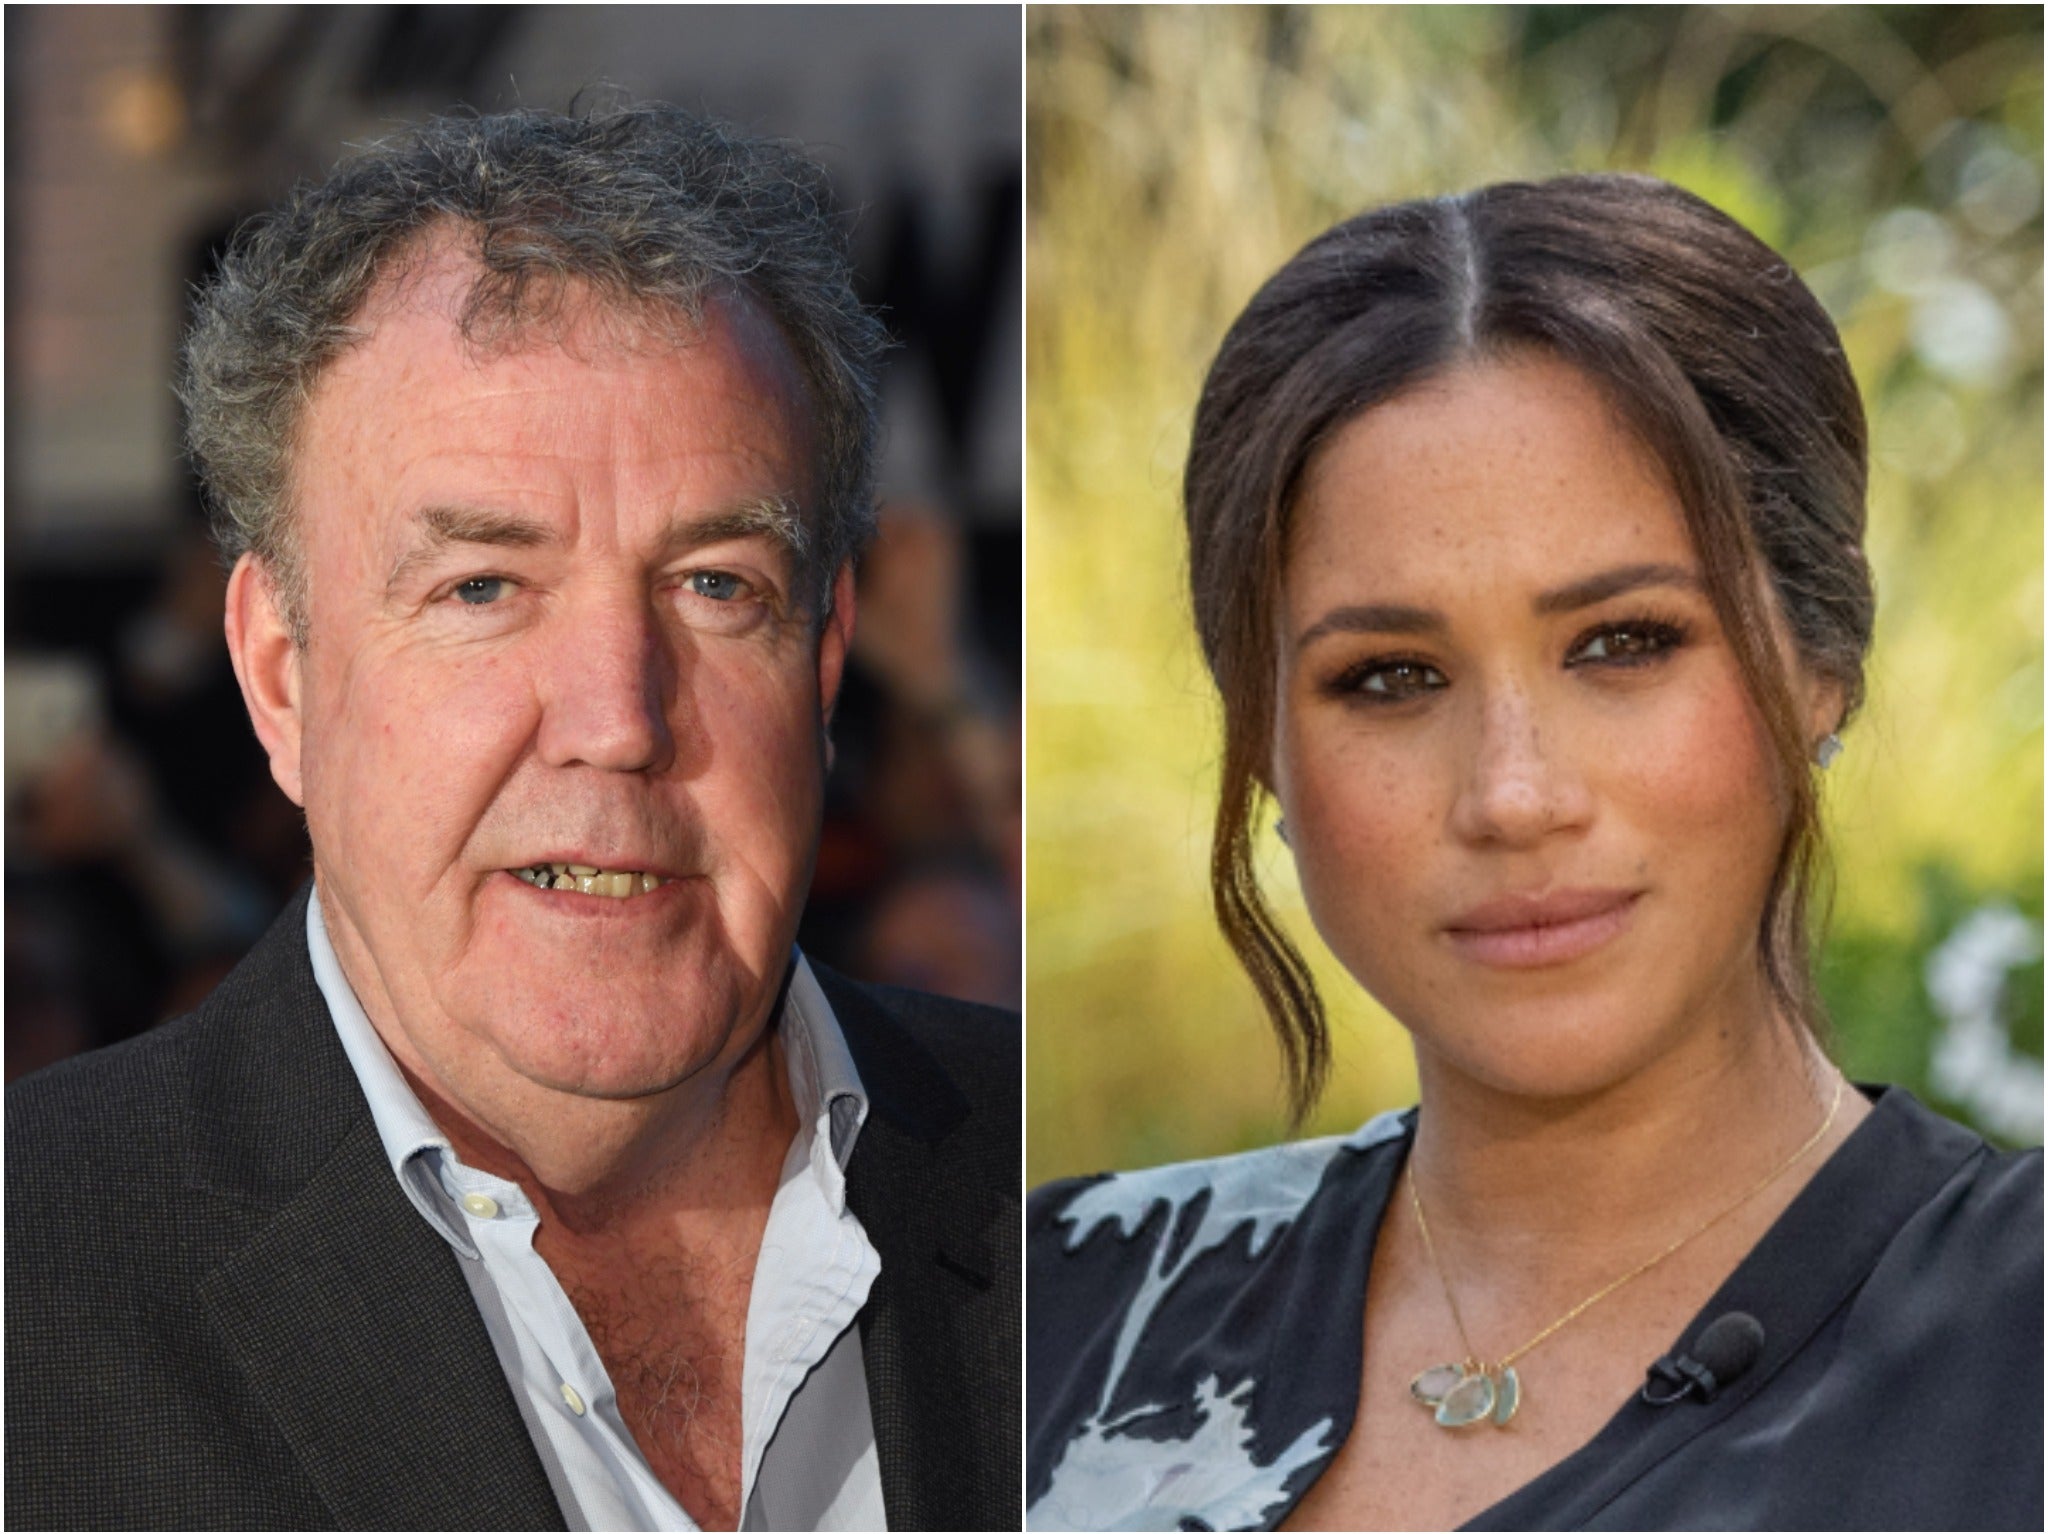 Jeremy Clarkson addressed Meghan Markle’s interview with Oprah in his Sun column